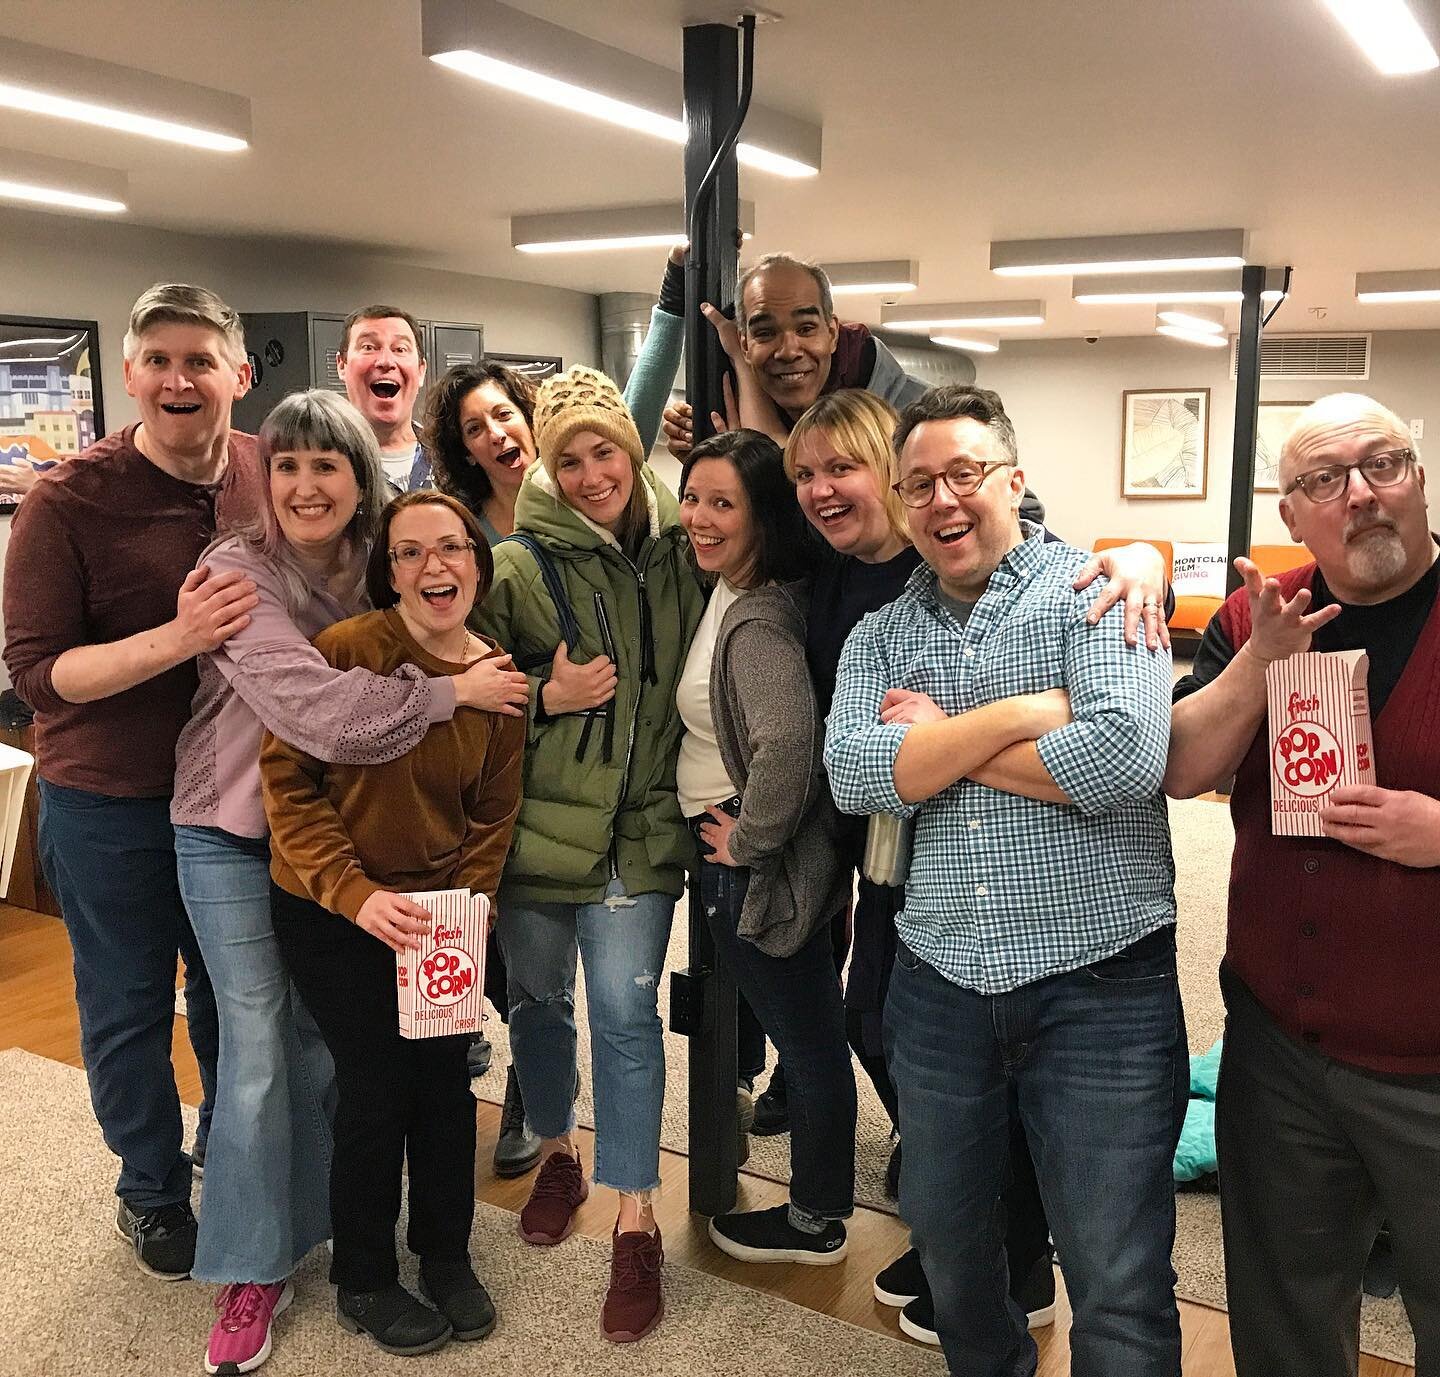 Montclair Improv Comedy! I mean&hellip; how lucky am I to share the stage with these amazing people. 🤗

#montclairimprovcomedy #montclairimprov #montclairnj #nj #improvgame #performingarts #comedicimprovisation #improvisation #theatergames #bloomfie